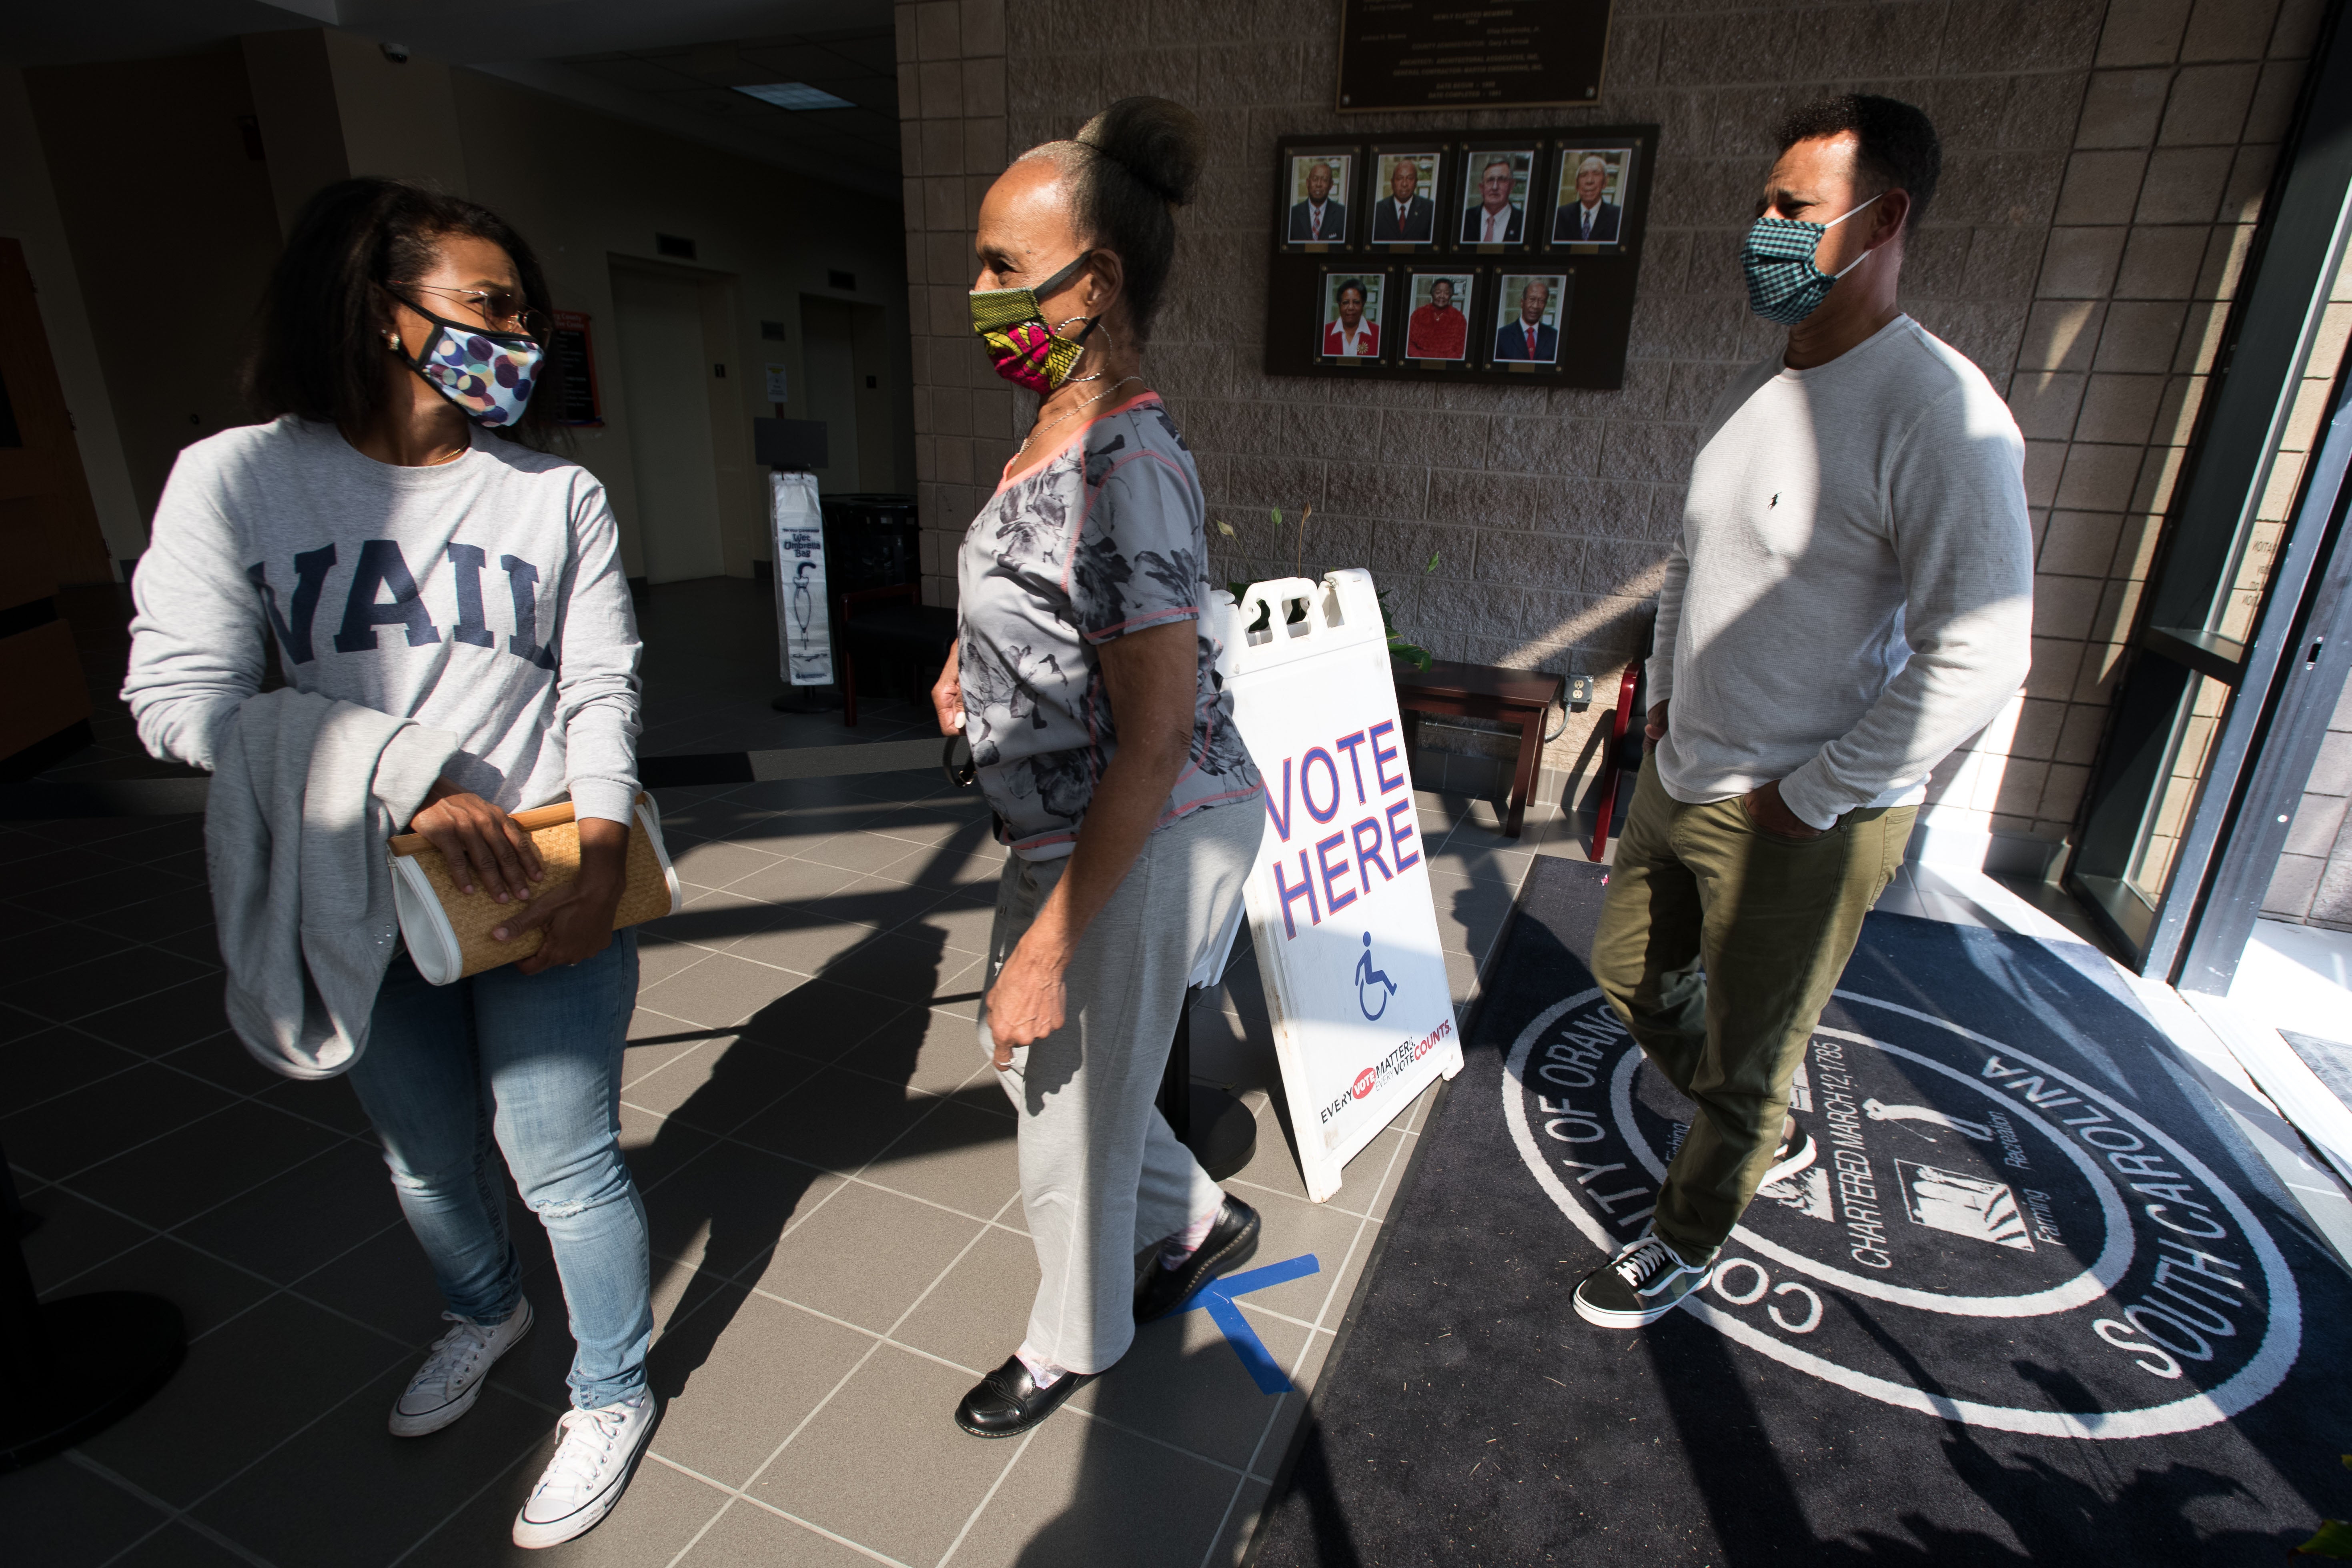 Kimberly Roache, left, Geneva Roache and Martin Roache stand in line to cast ballots at the Richland County Voter Registration and Elections Office in Columbia, South Carolina, on the first day of in-person absentee voting on Monday